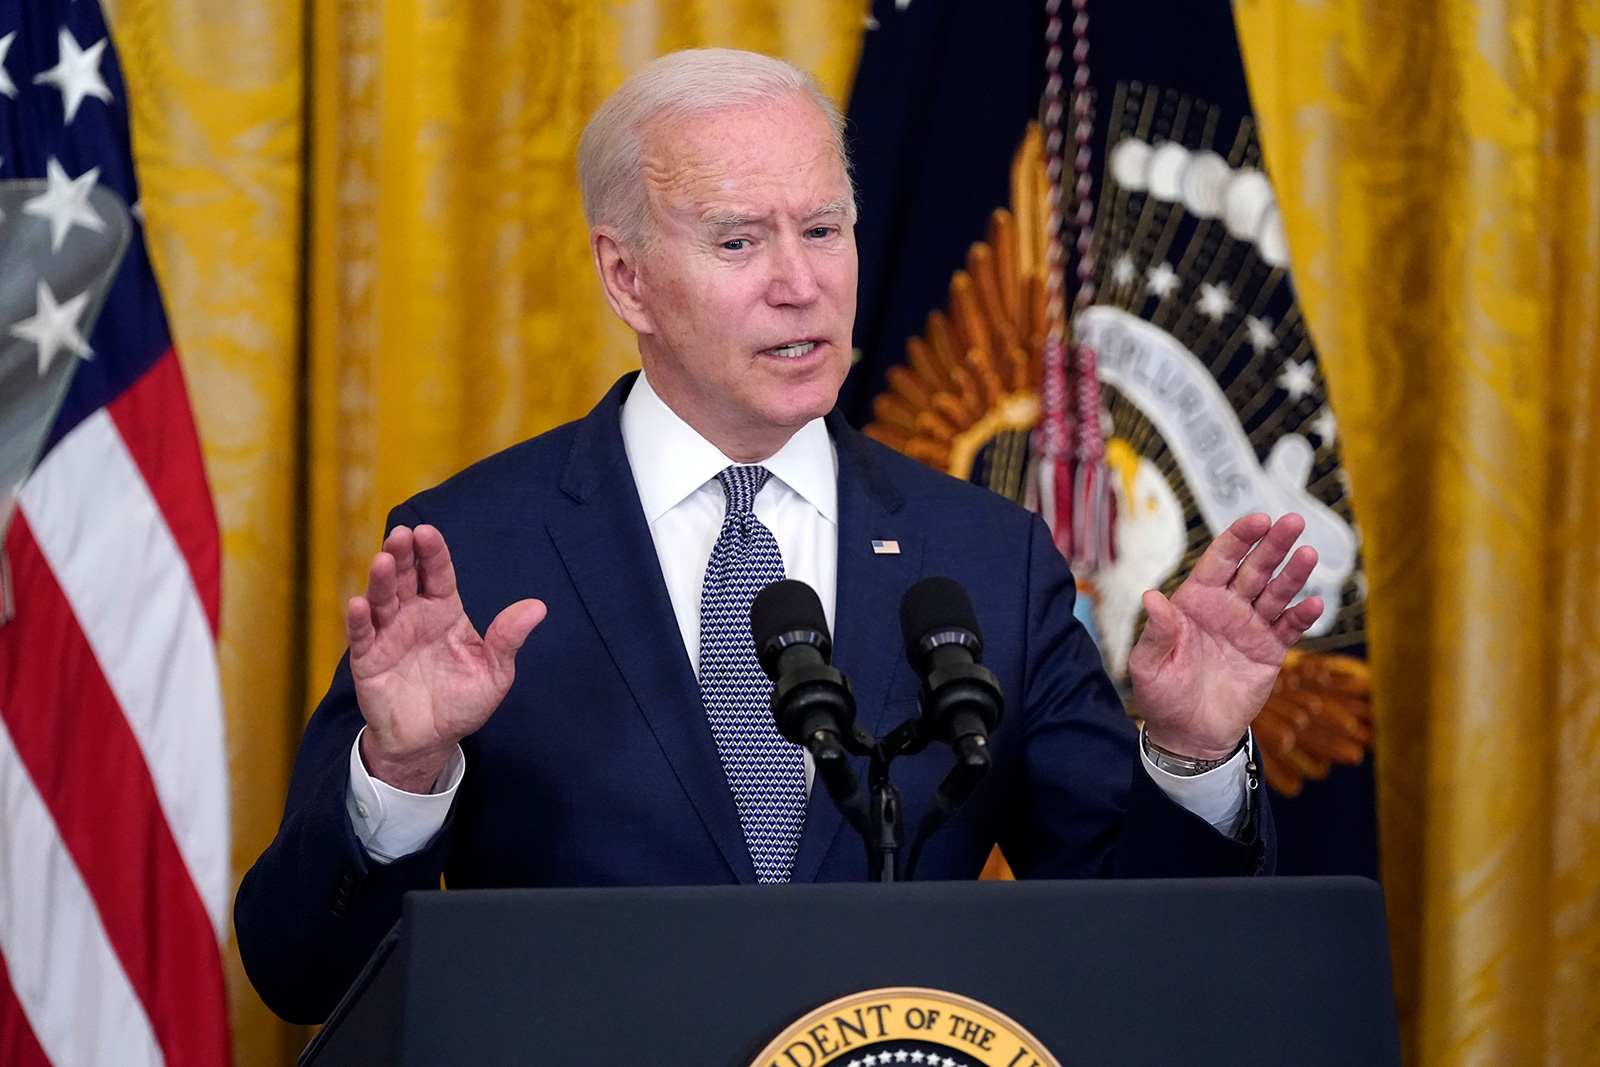 President Joe Biden speaks during an event to mark the passage of the Juneteenth National Independence Day Act.